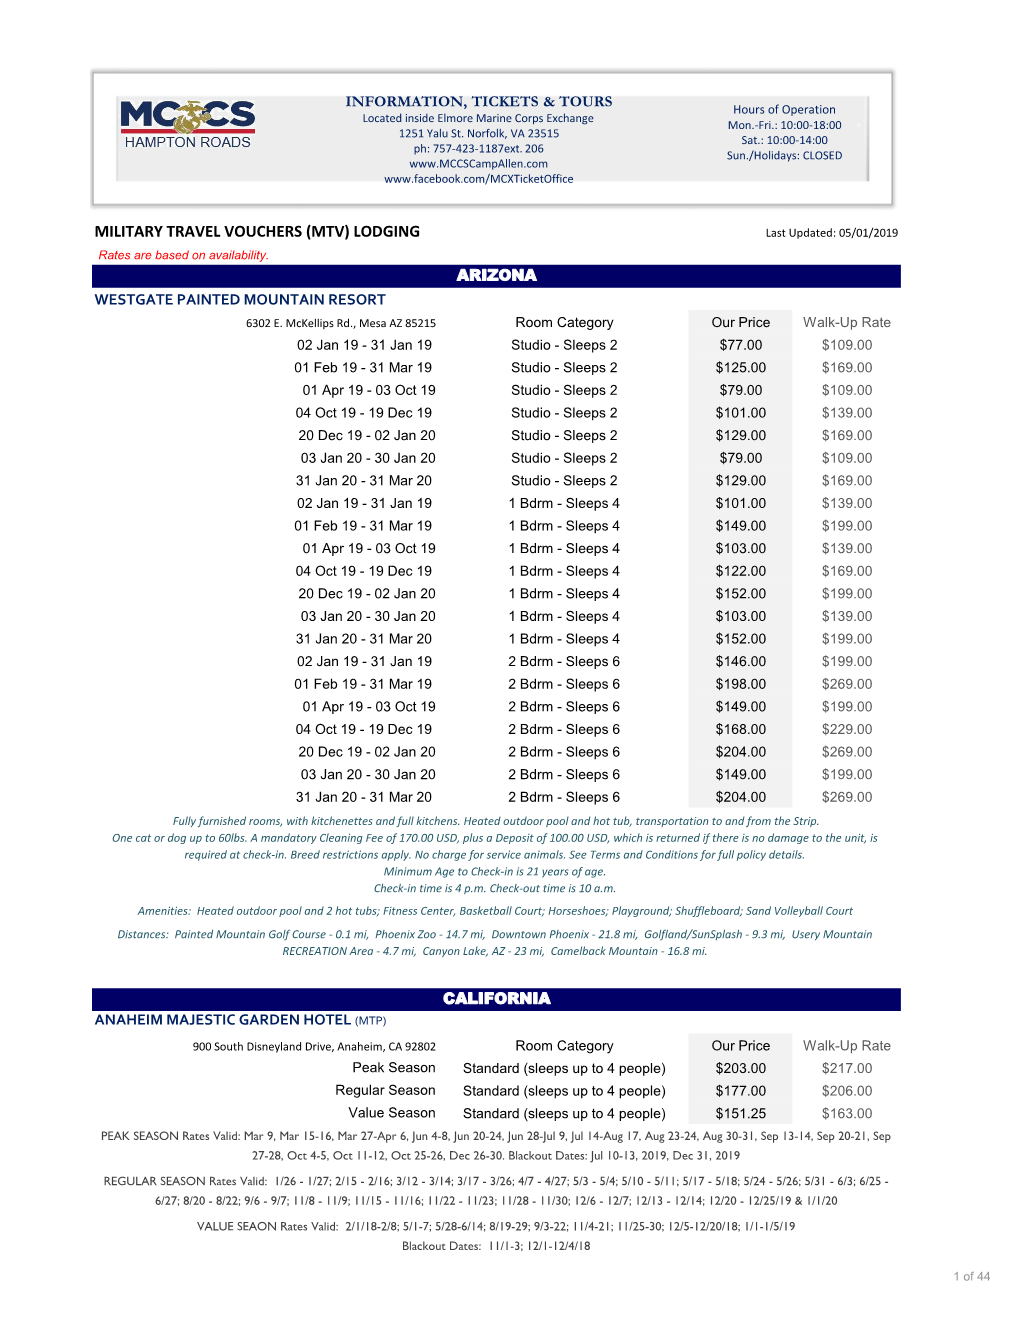 MILITARY TRAVEL VOUCHERS (MTV) LODGING Last Updated: 05/01/2019 Rates Are Based on Availability